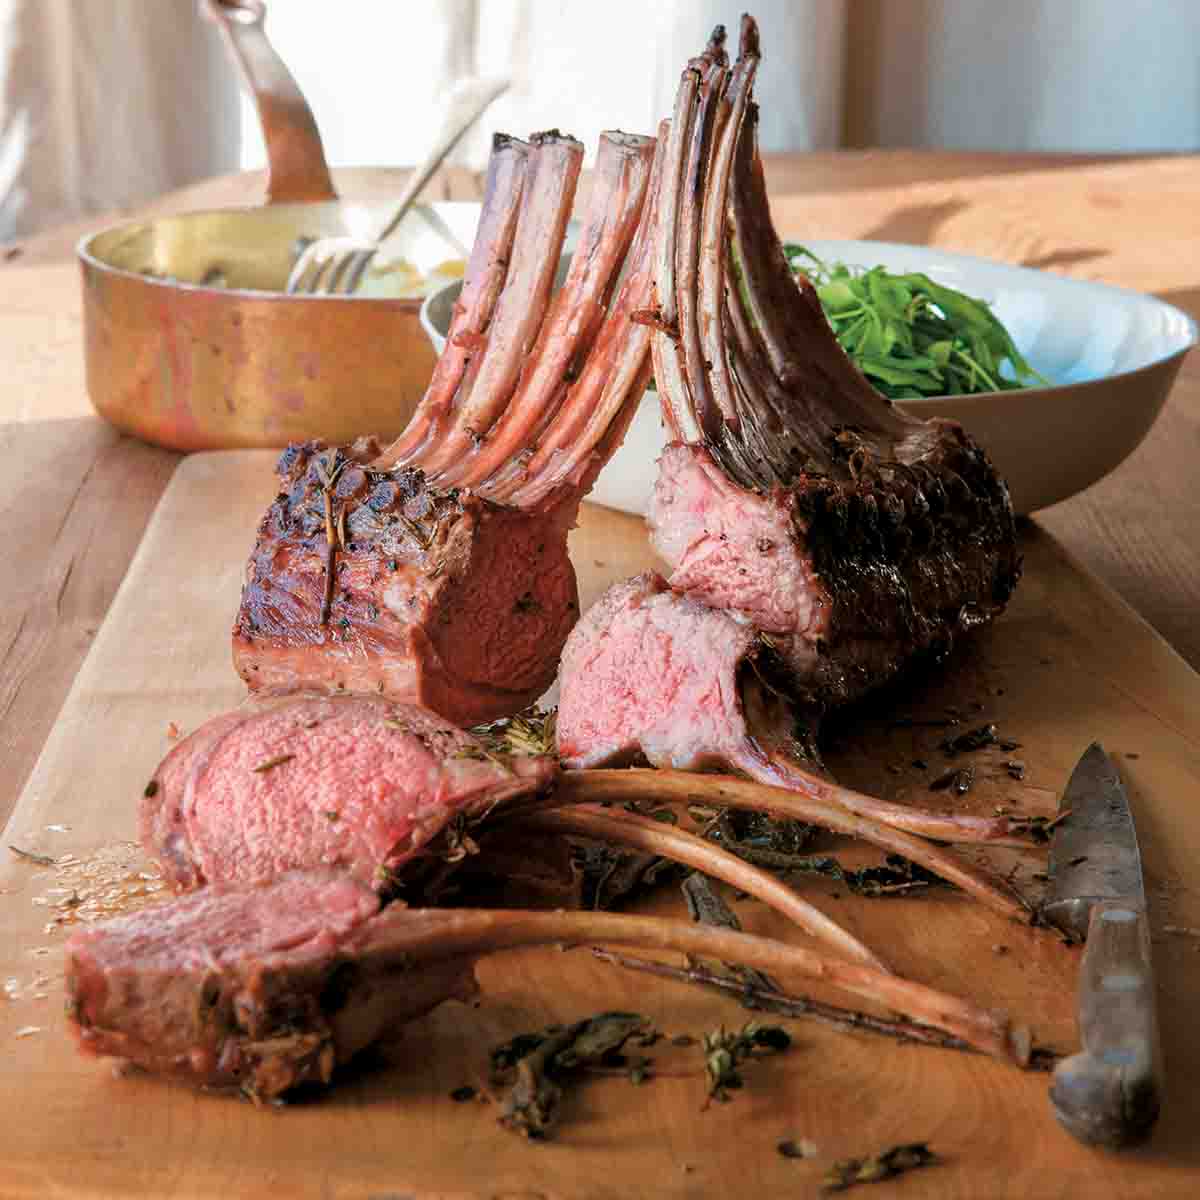 Cutting board with a sliced rack of spring lamb with rosemary, knife, bowl of salad.